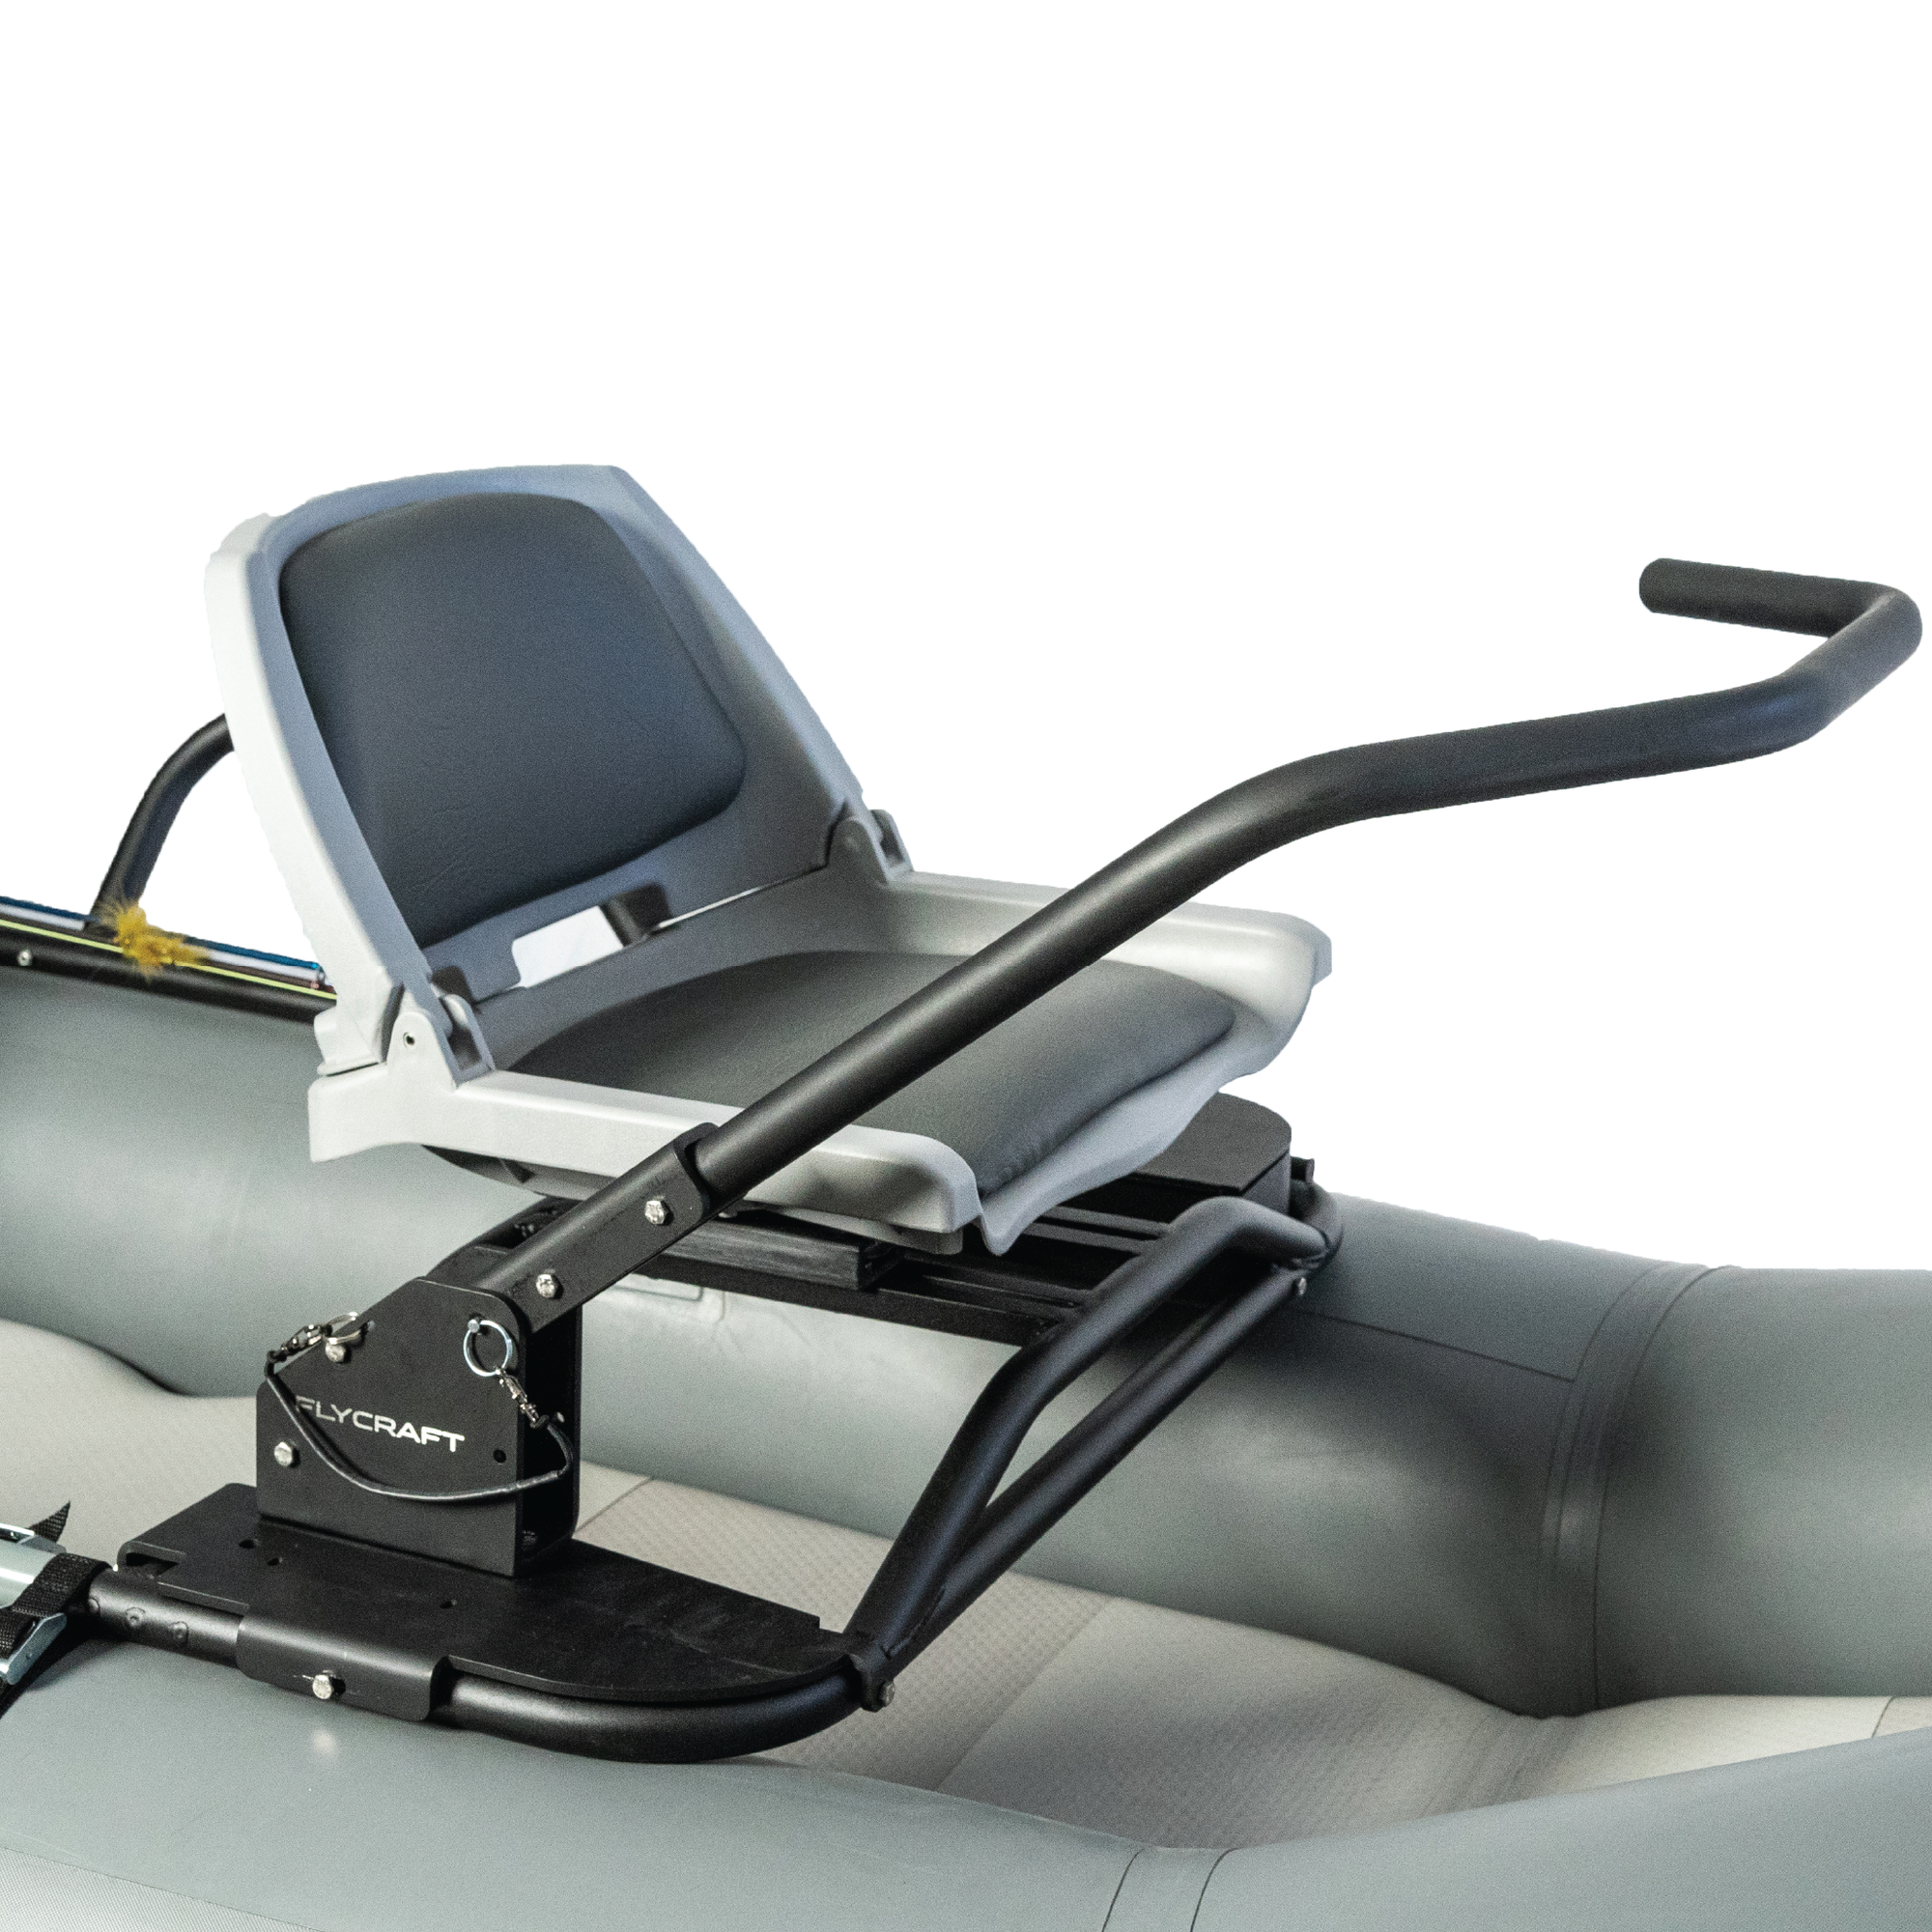 Flycraft’s Inflatable Fishing Boat: Stealth 2.0 Pro Package (2-Man)